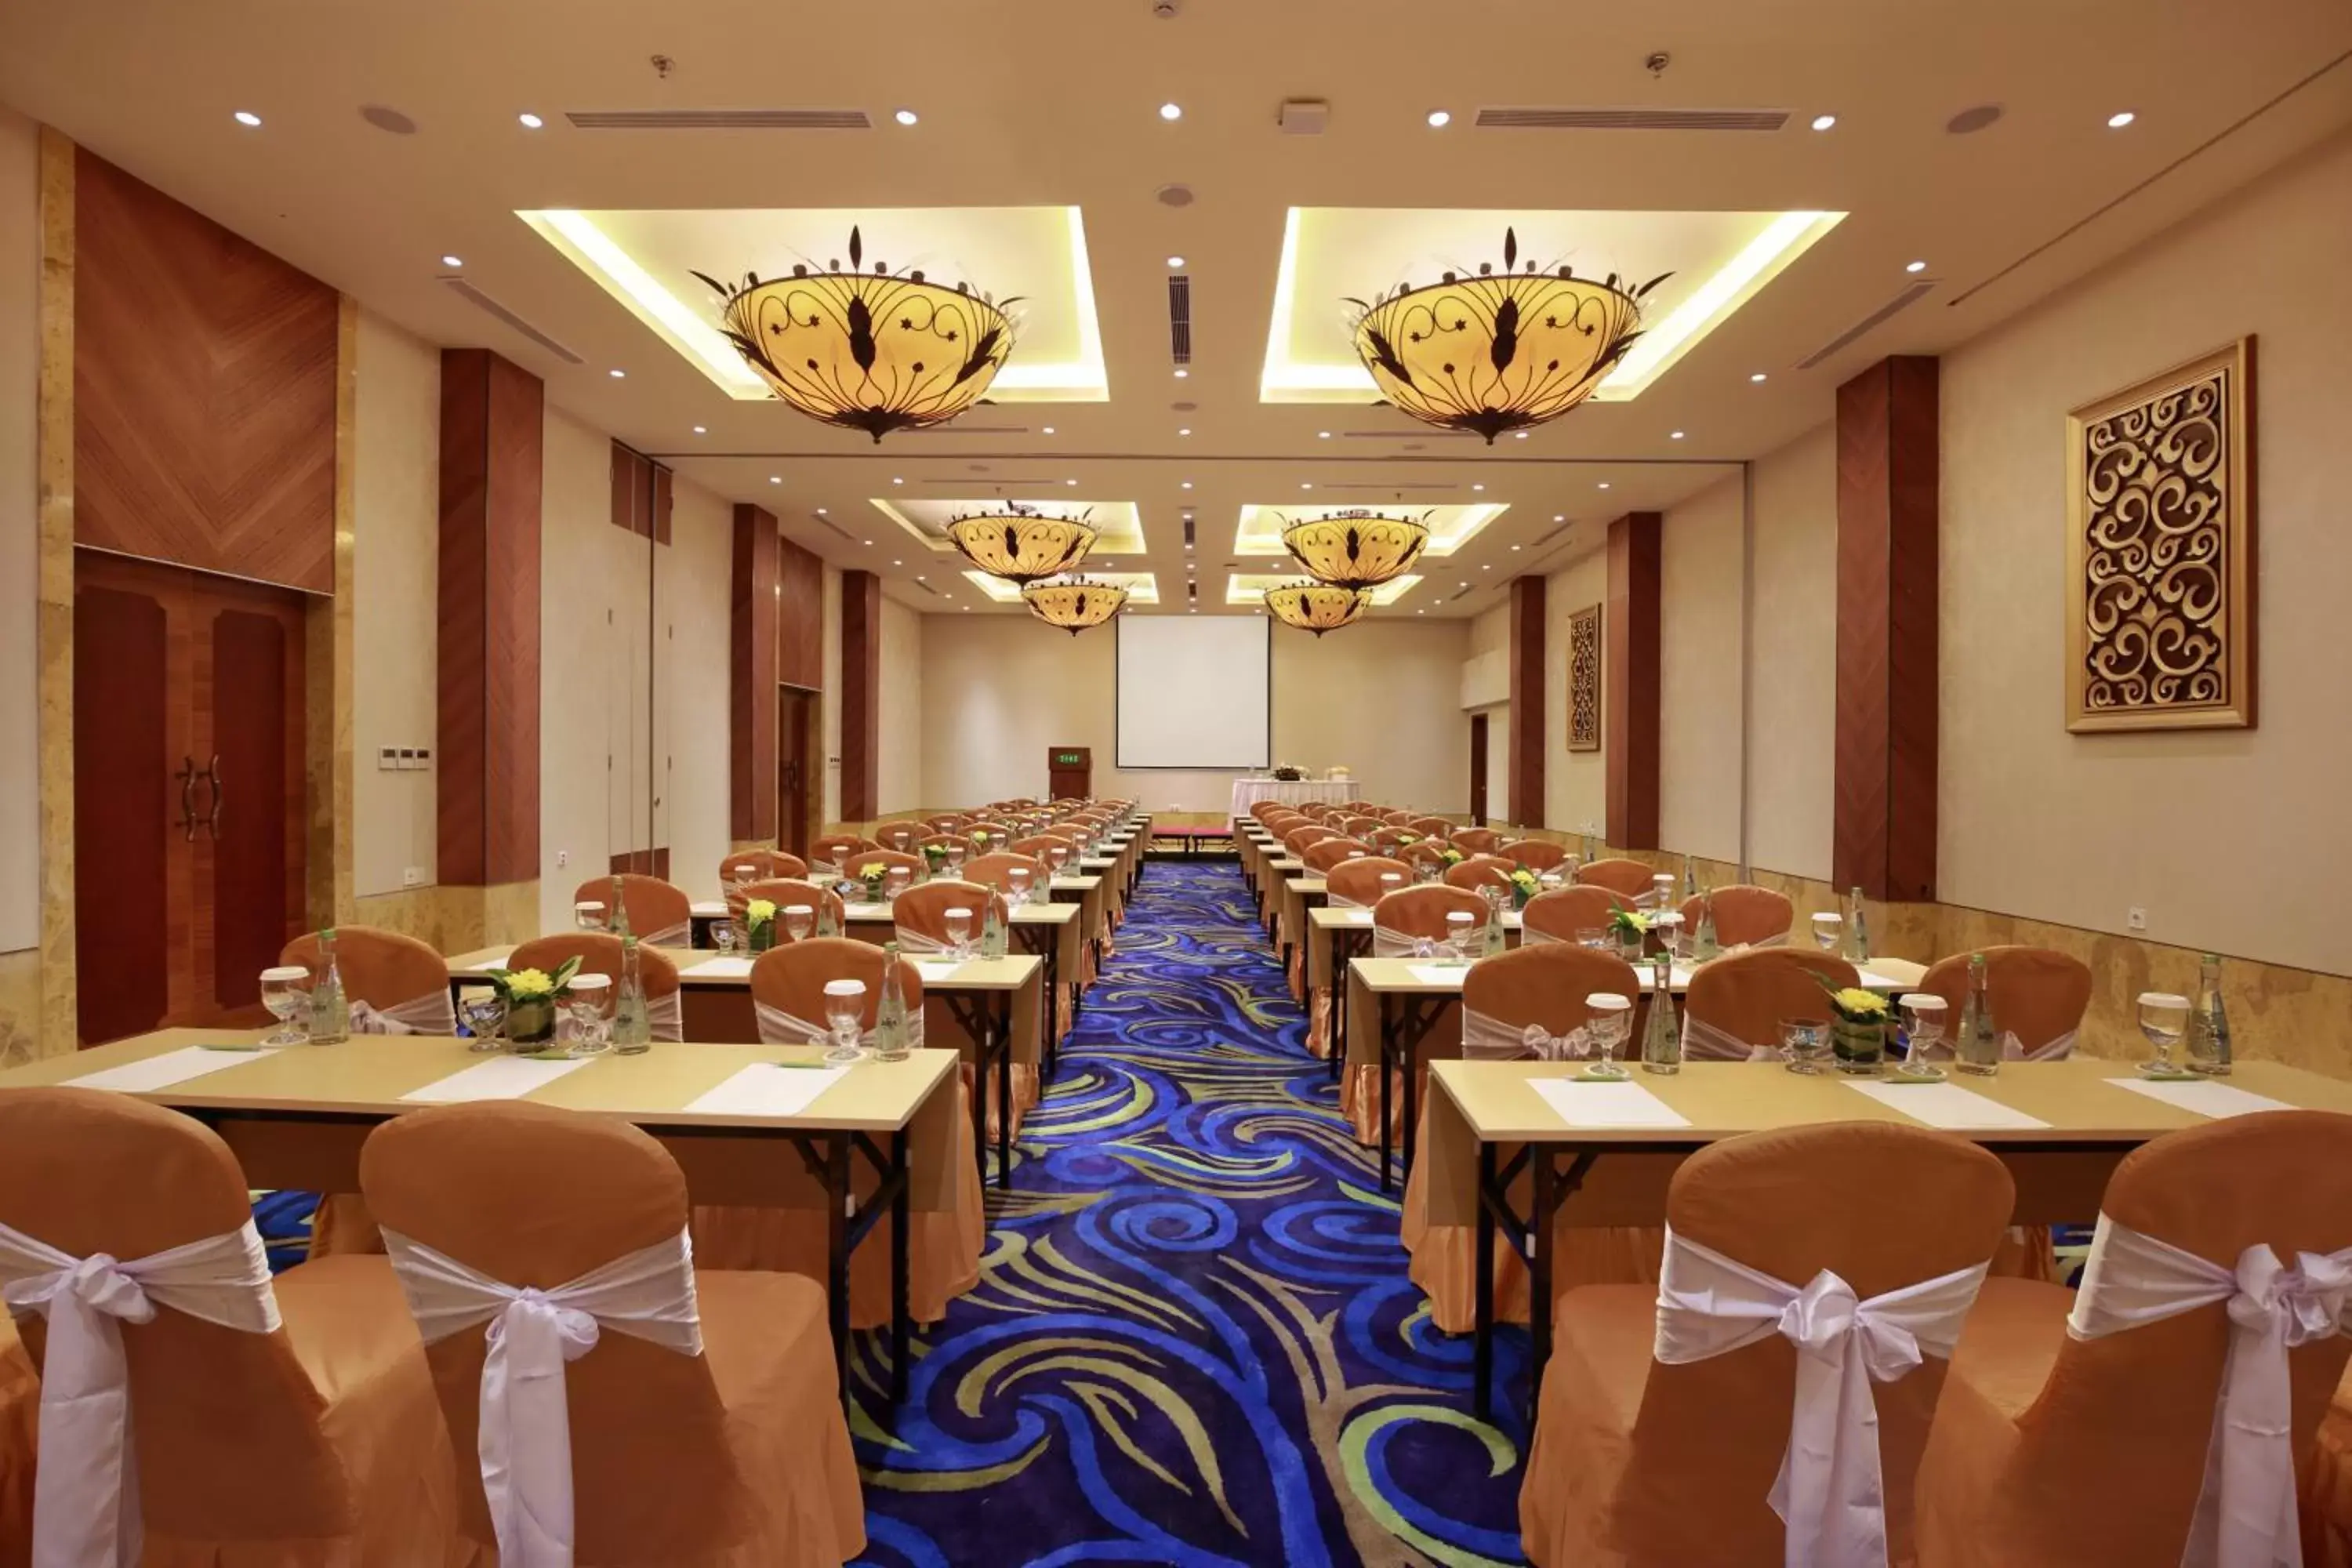 Meeting/conference room, Banquet Facilities in SenS Hotel and Spa